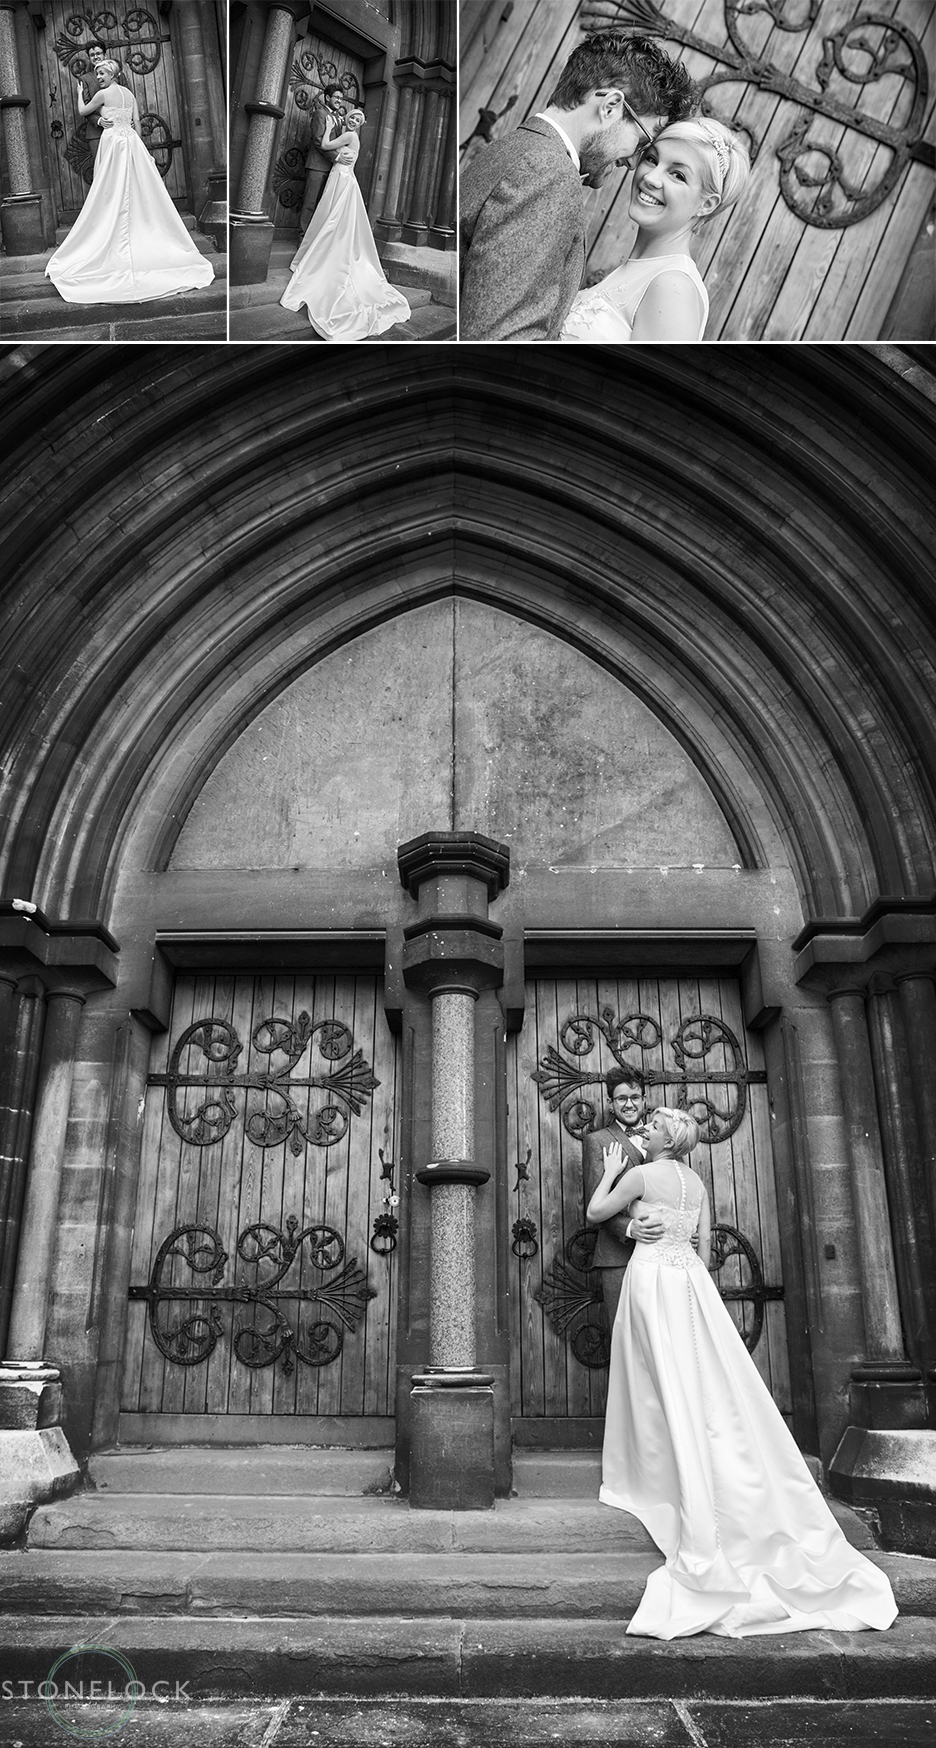 The bride and groom pose for some wedding photos outside Woodlands Church in Bristol after their wedding ceremony. The photos are in black and white.